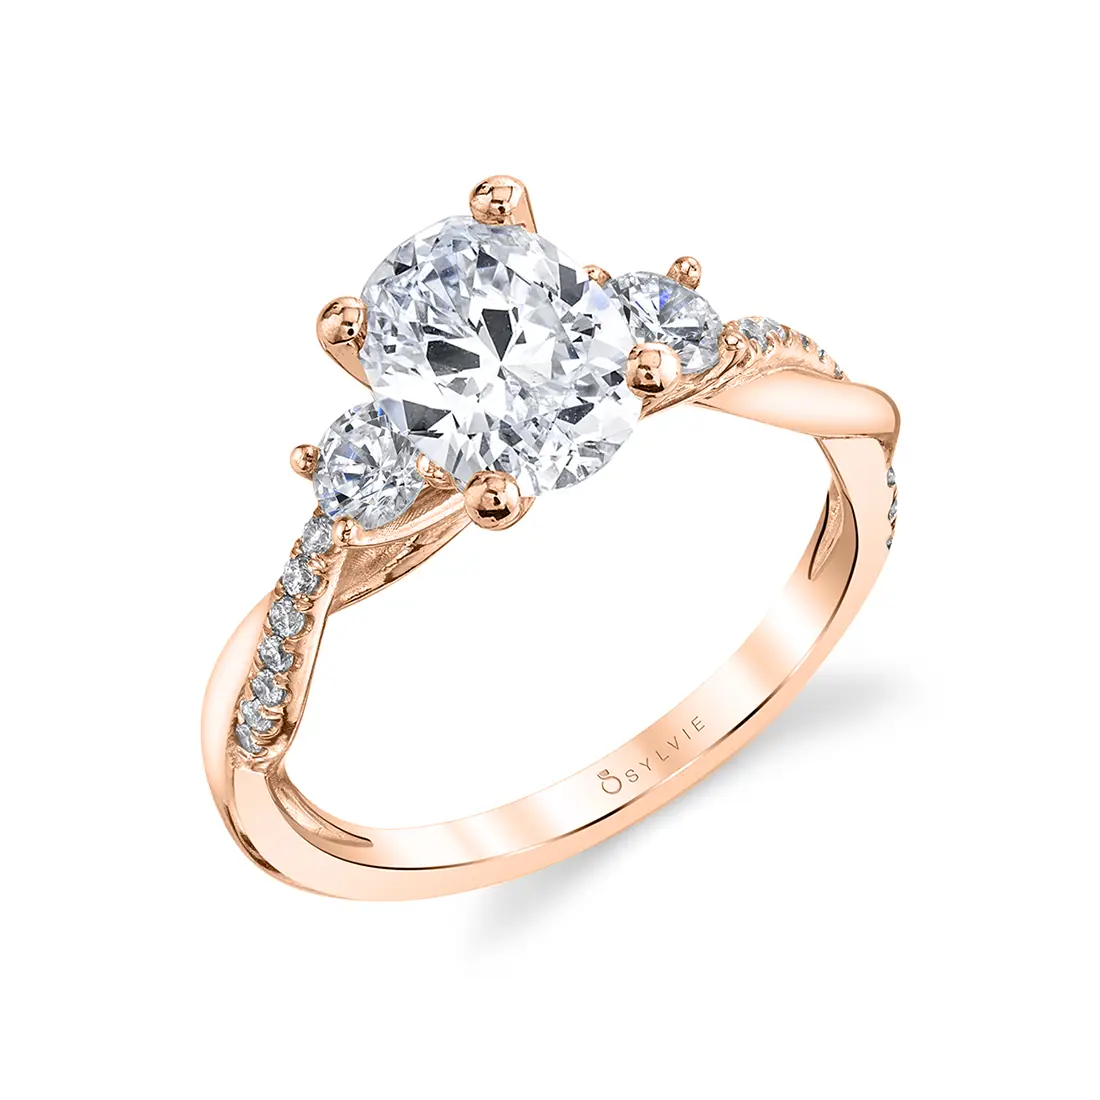 3 stone oval engagement ring with round side stones shown in rose gold - Style 